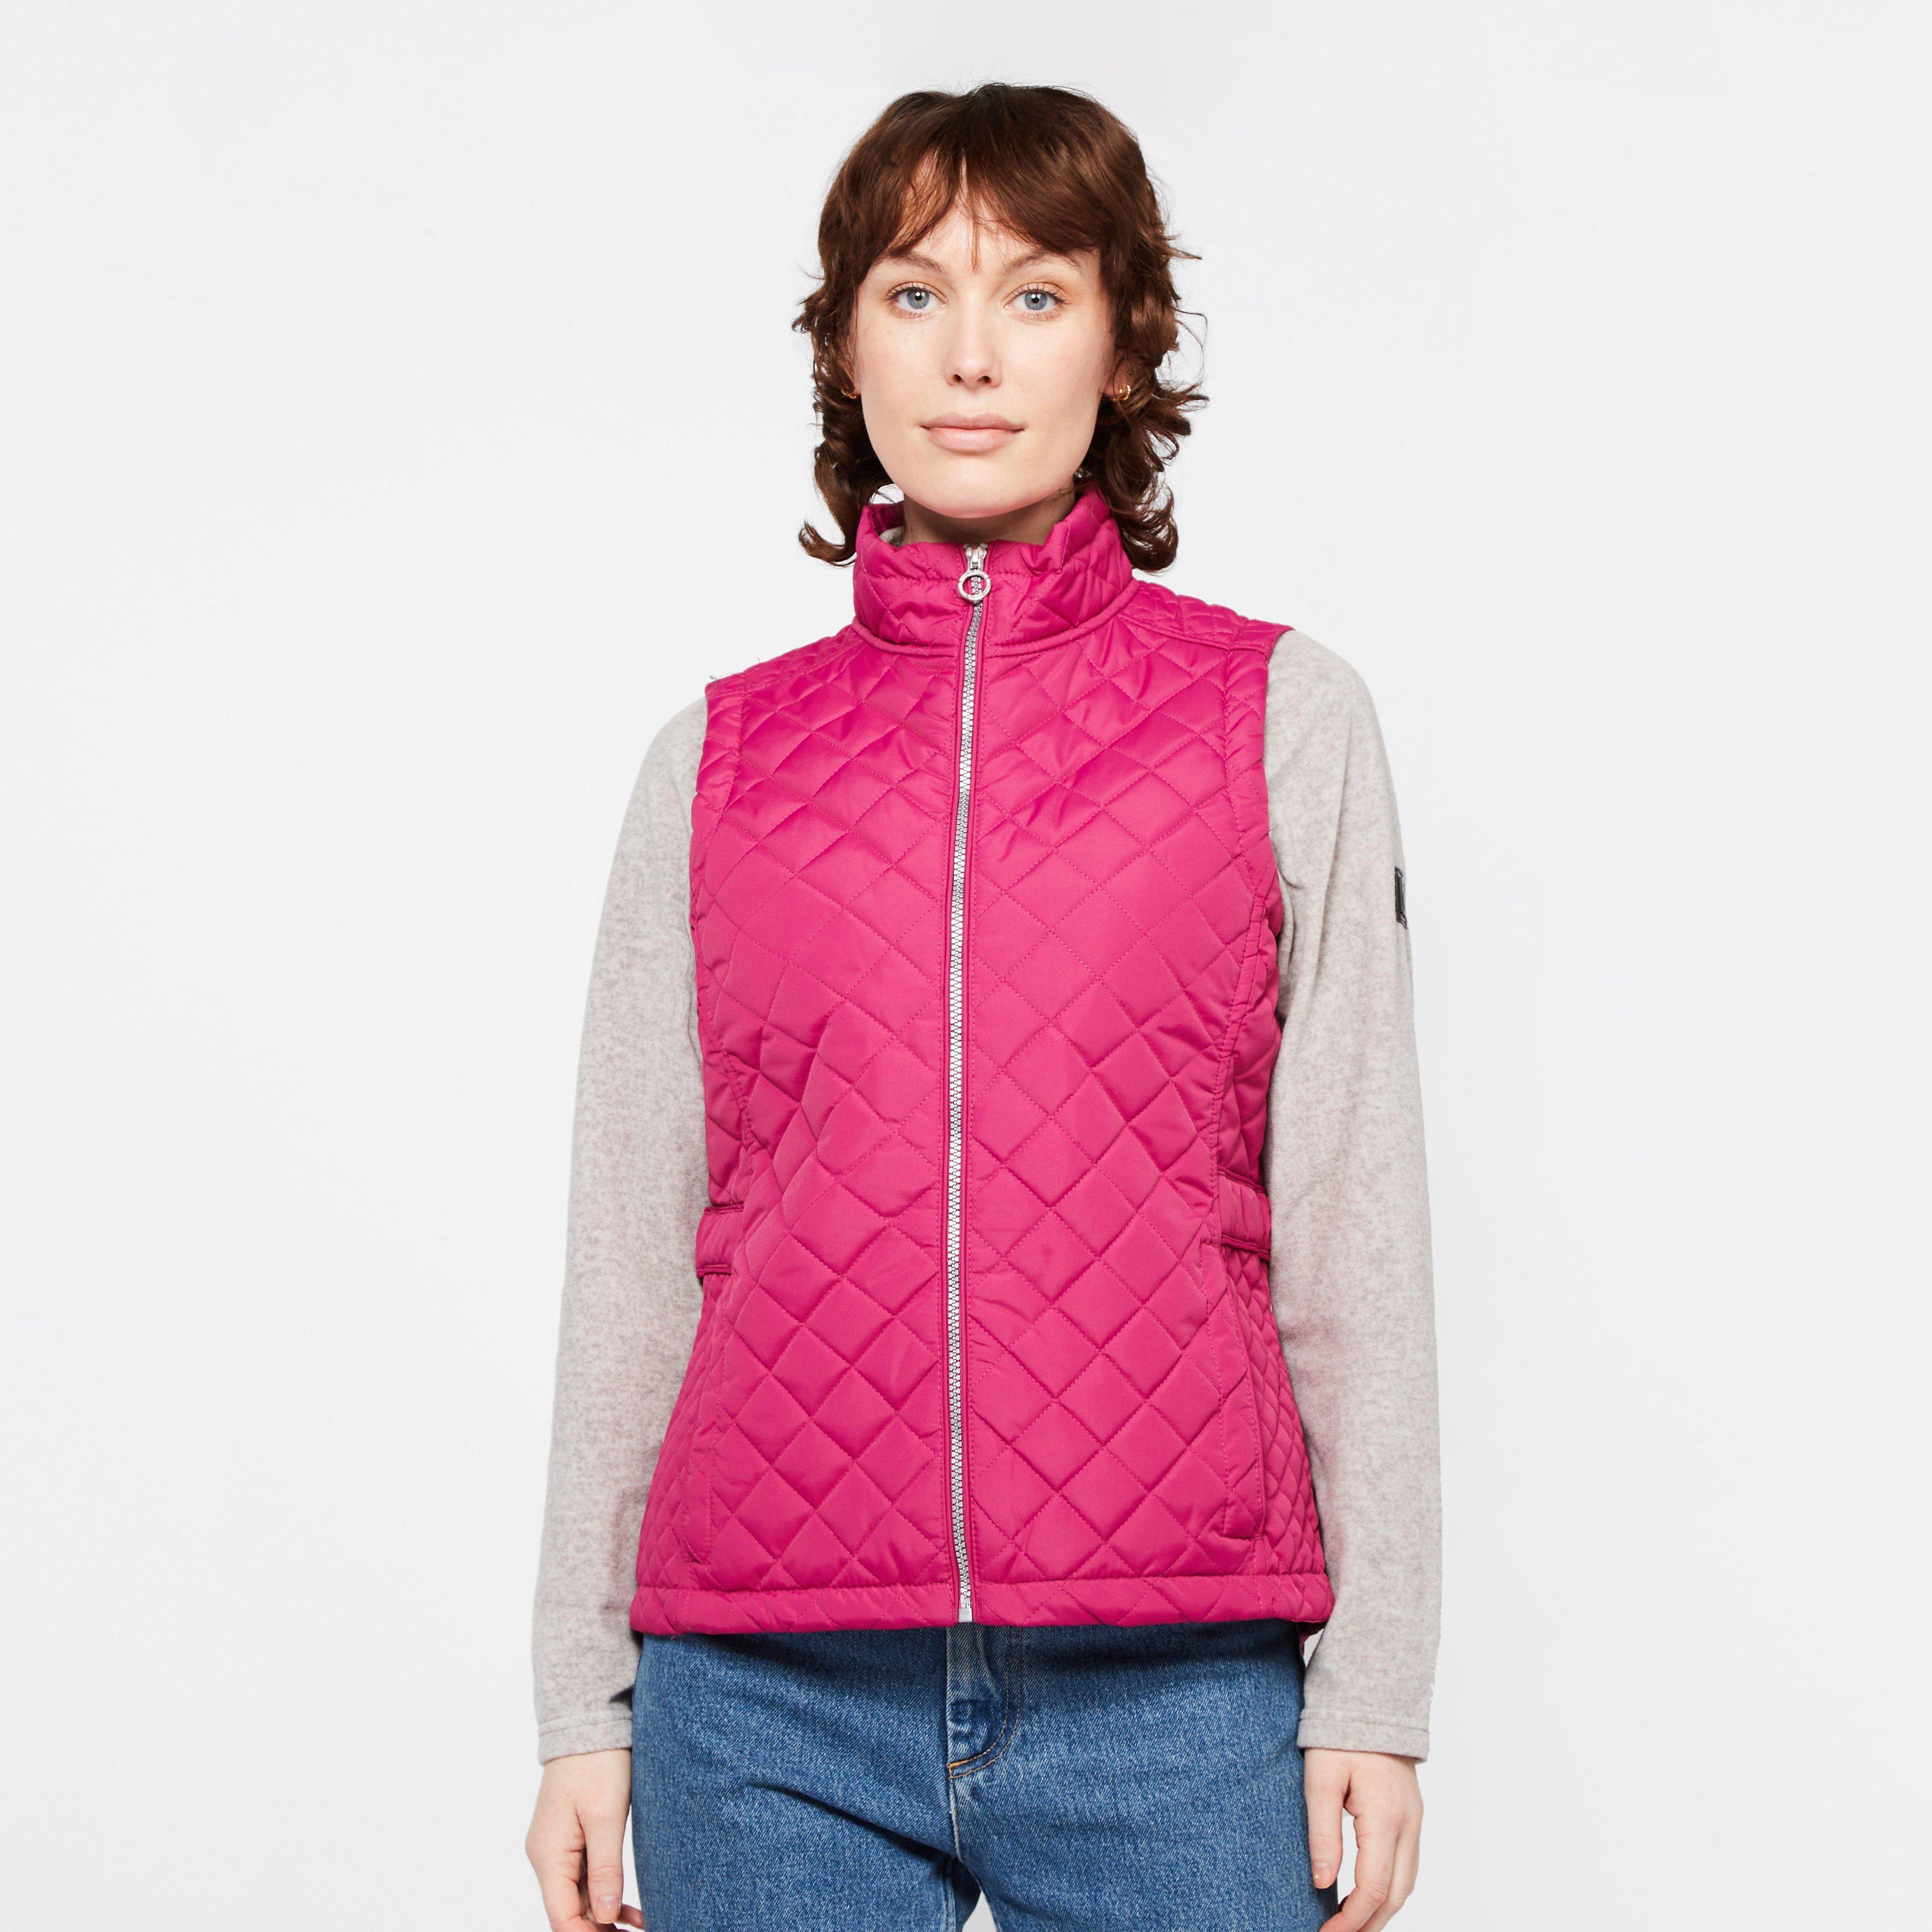 Image of Regatta Women's Charleigh Quilted Insulated Bodywarmer - Pink/Pink, PINK/PINK